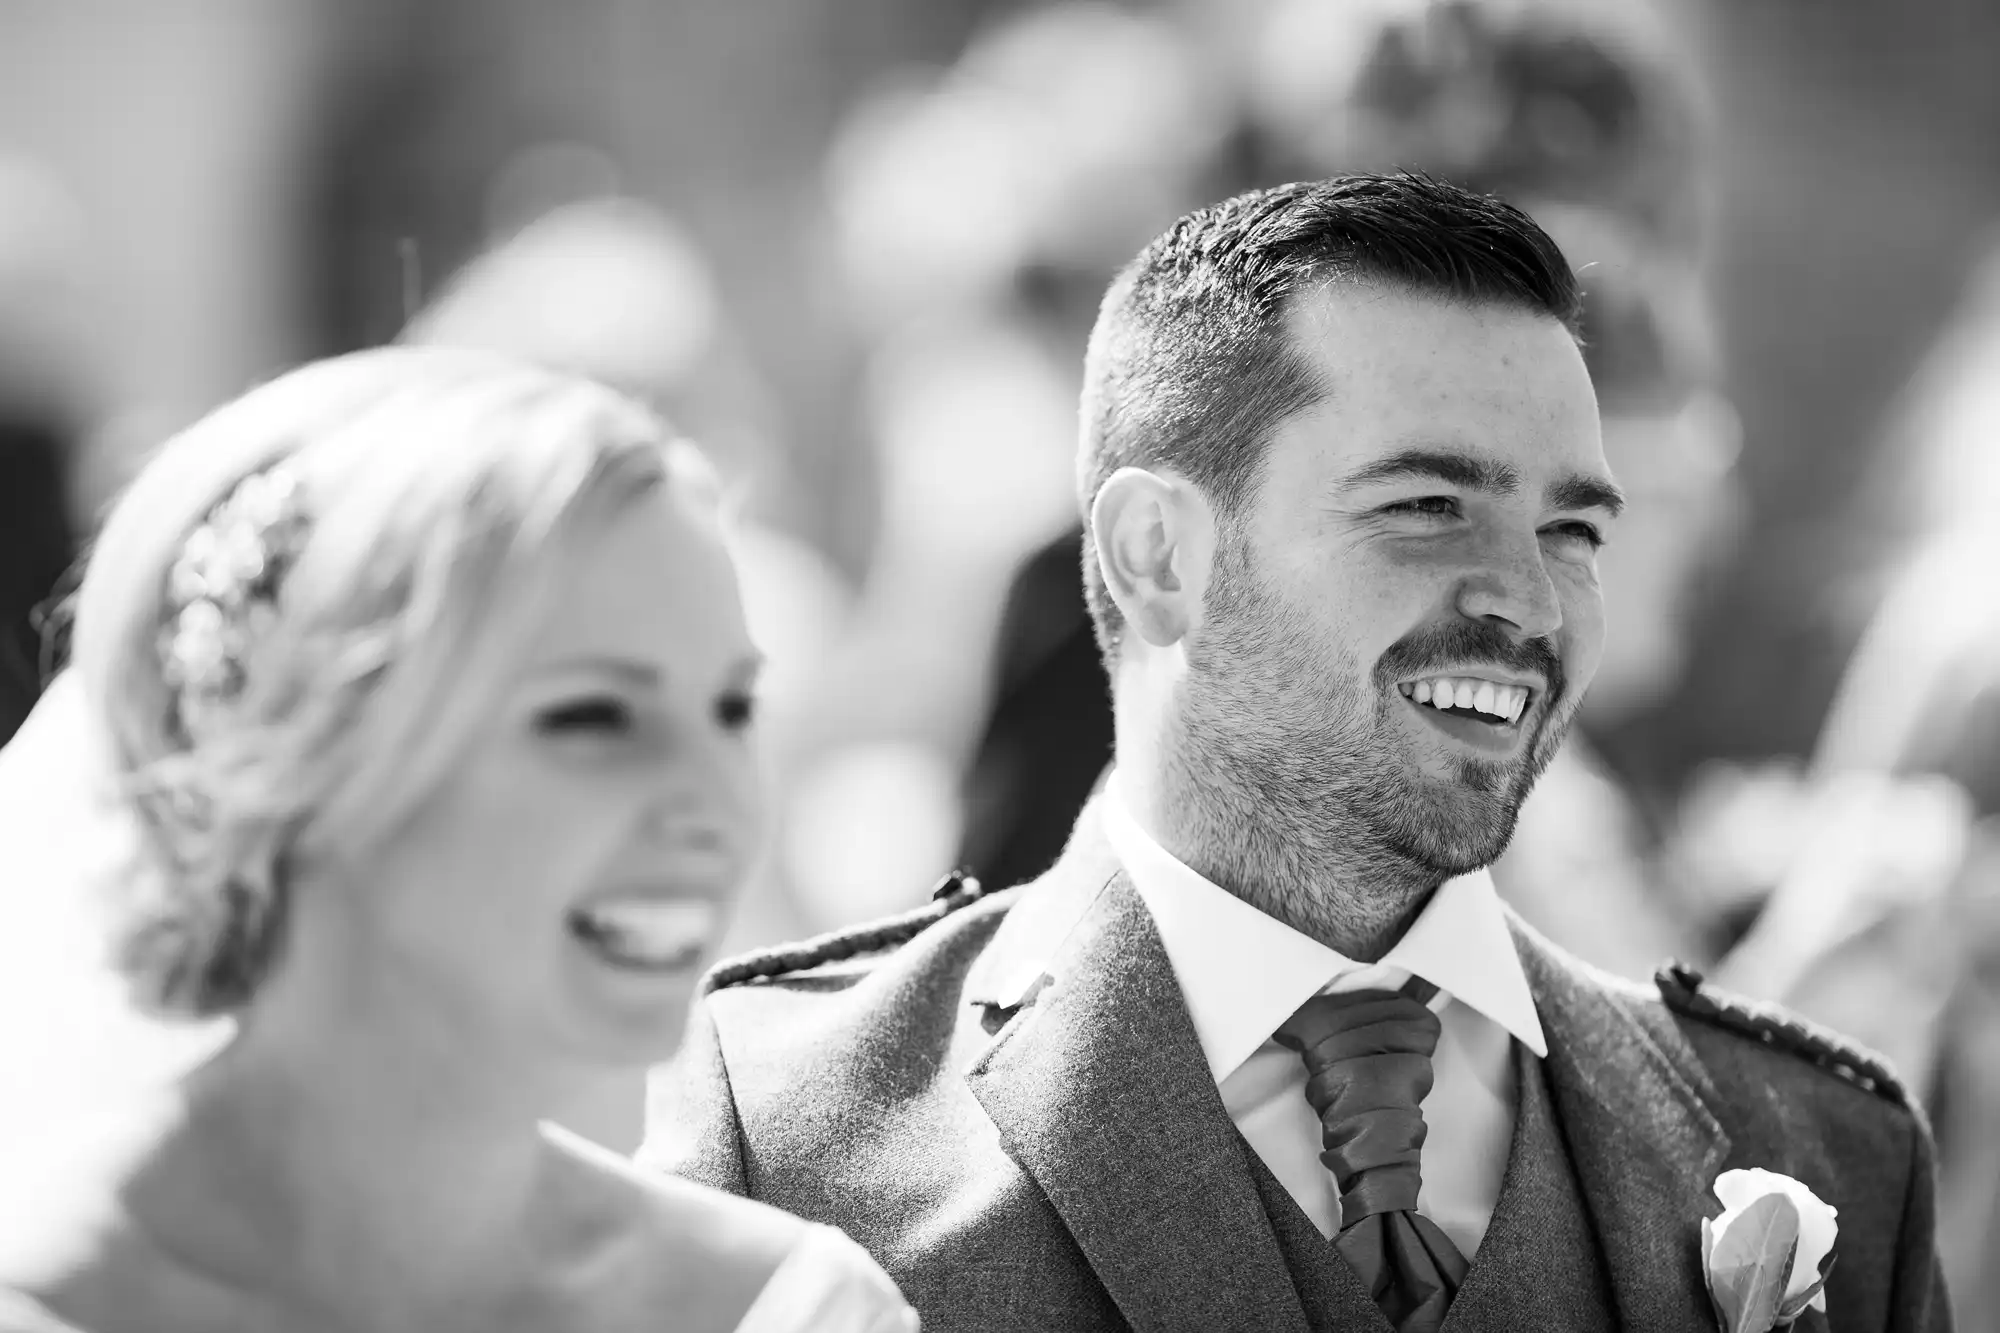 A smiling bride and groom in wedding attire share a joyful moment. The groom wears a suit with a tie, and the bride has blonde hair and a veil. The image is in black and white.